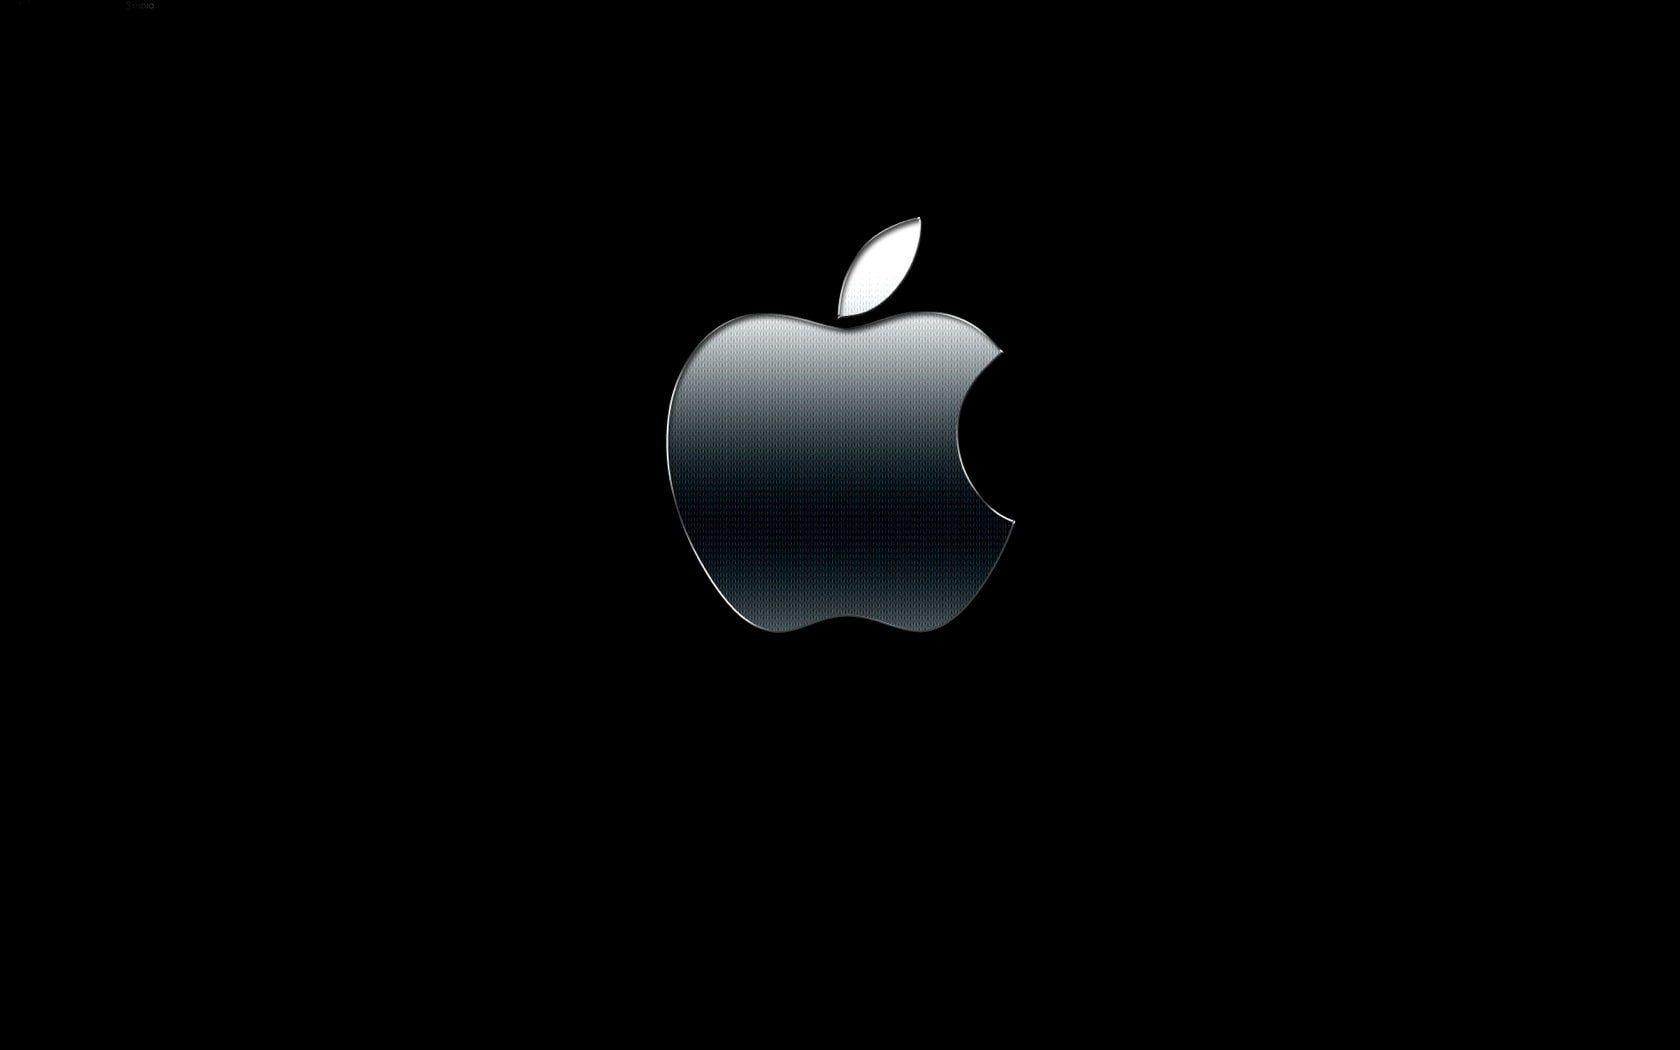 Apple Company Wallpapers - Top Free Apple Company Backgrounds ...